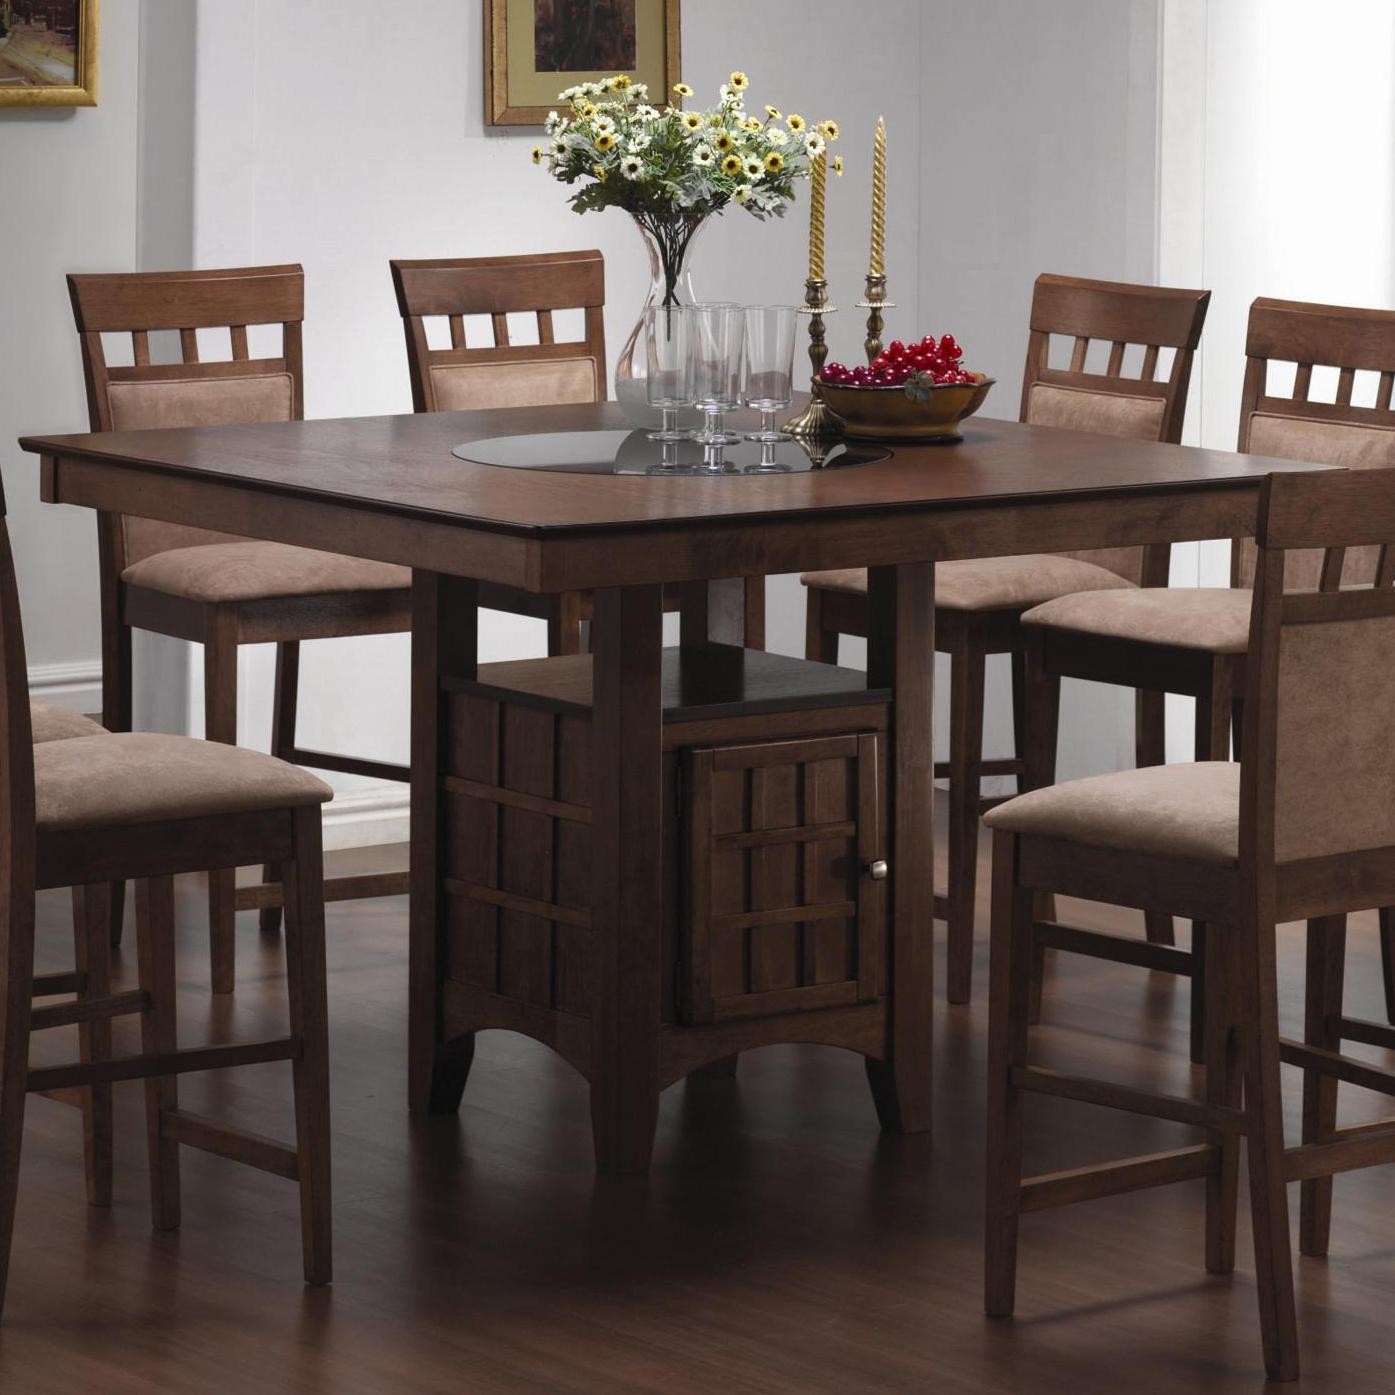 Counter Height Pedestal Dining Table